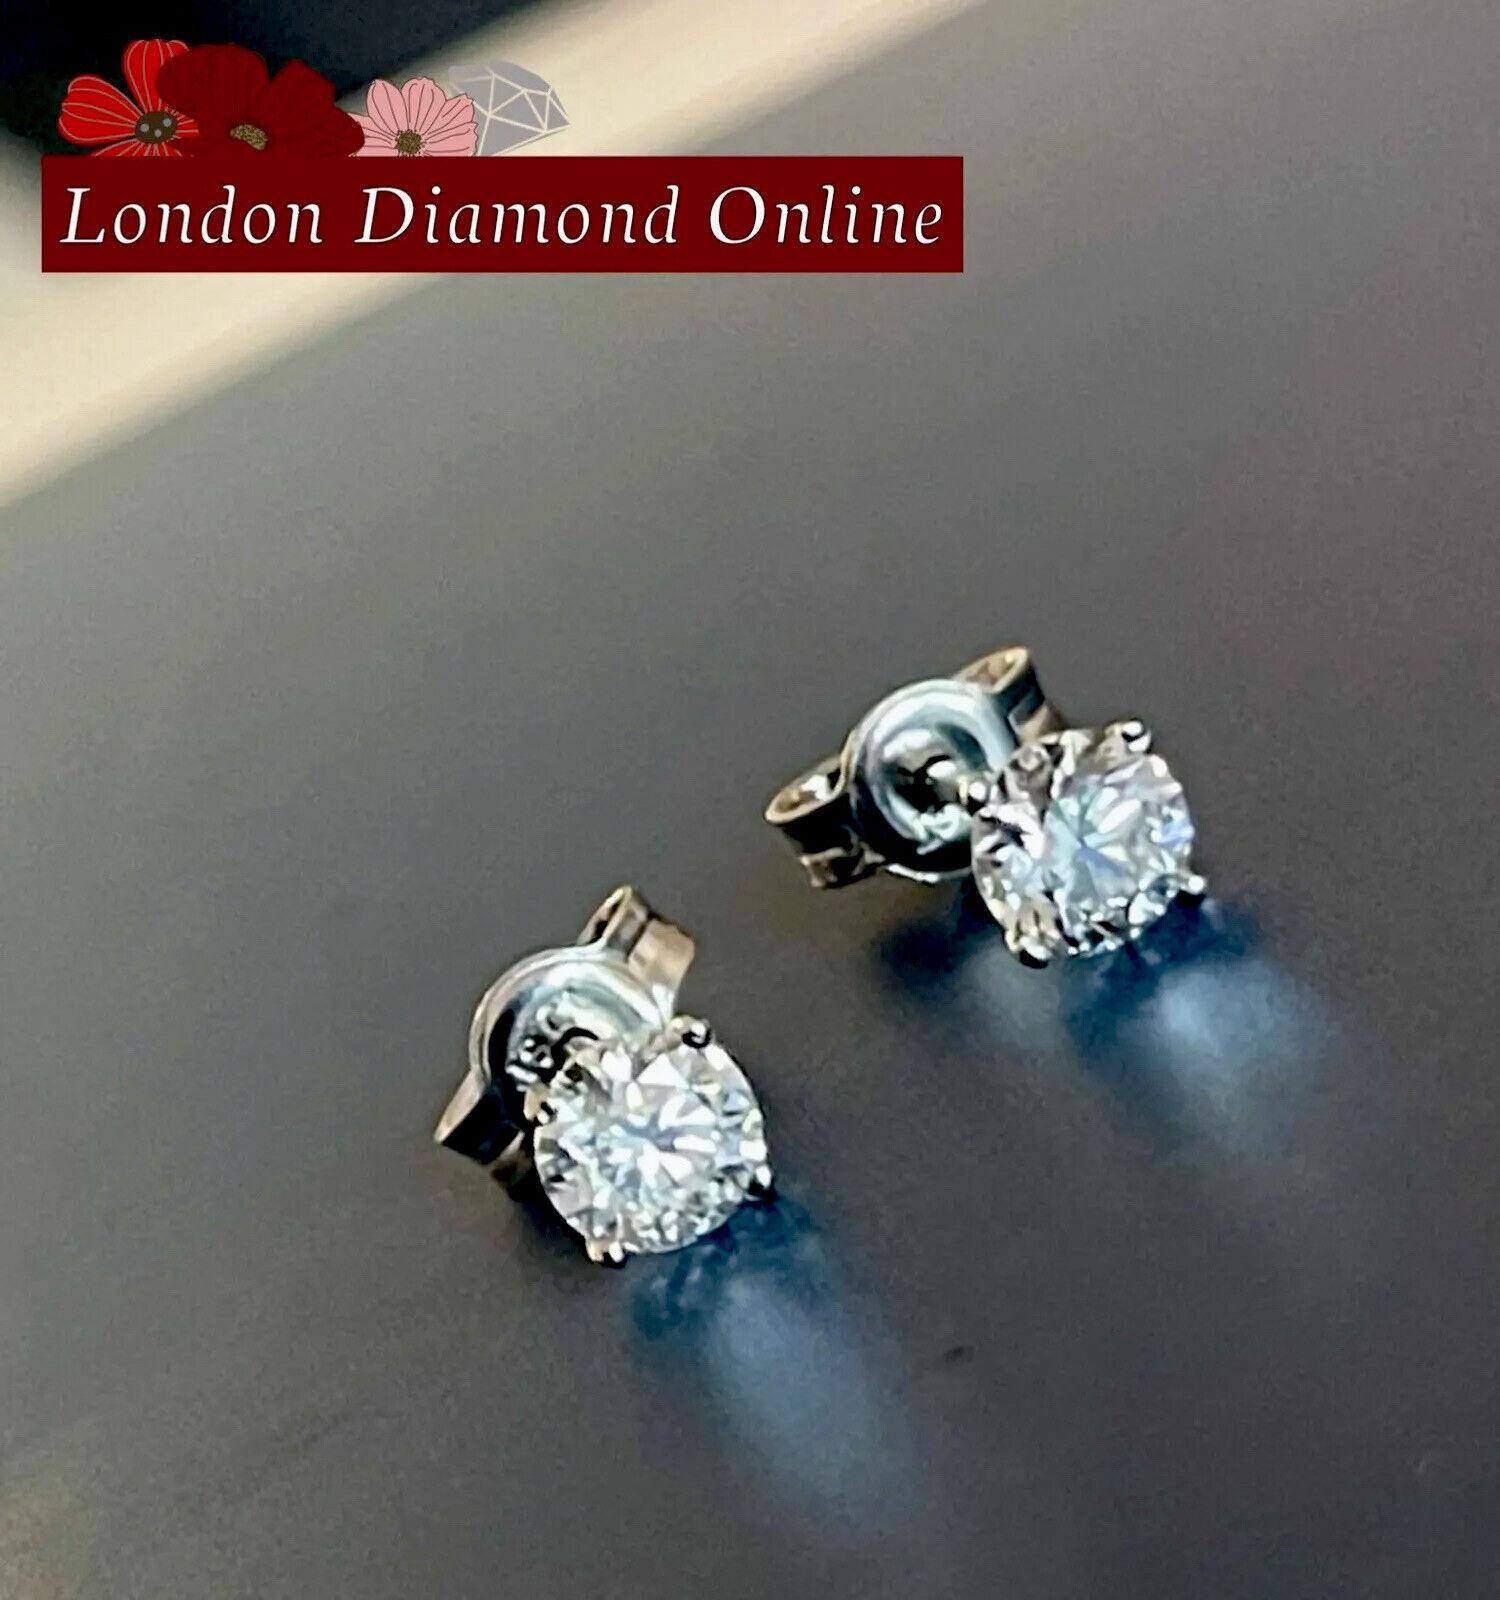 Classic and dazzling

18ct White Gold 0.85ct in total pair

Just under 5mm each diamond solitaire studs.

Fully Hallmarked for 750 18ct Gold

G/H

SI

They ll come with insurance valuation of £2700 so grab excellent bargain

Brand new, bespoke made